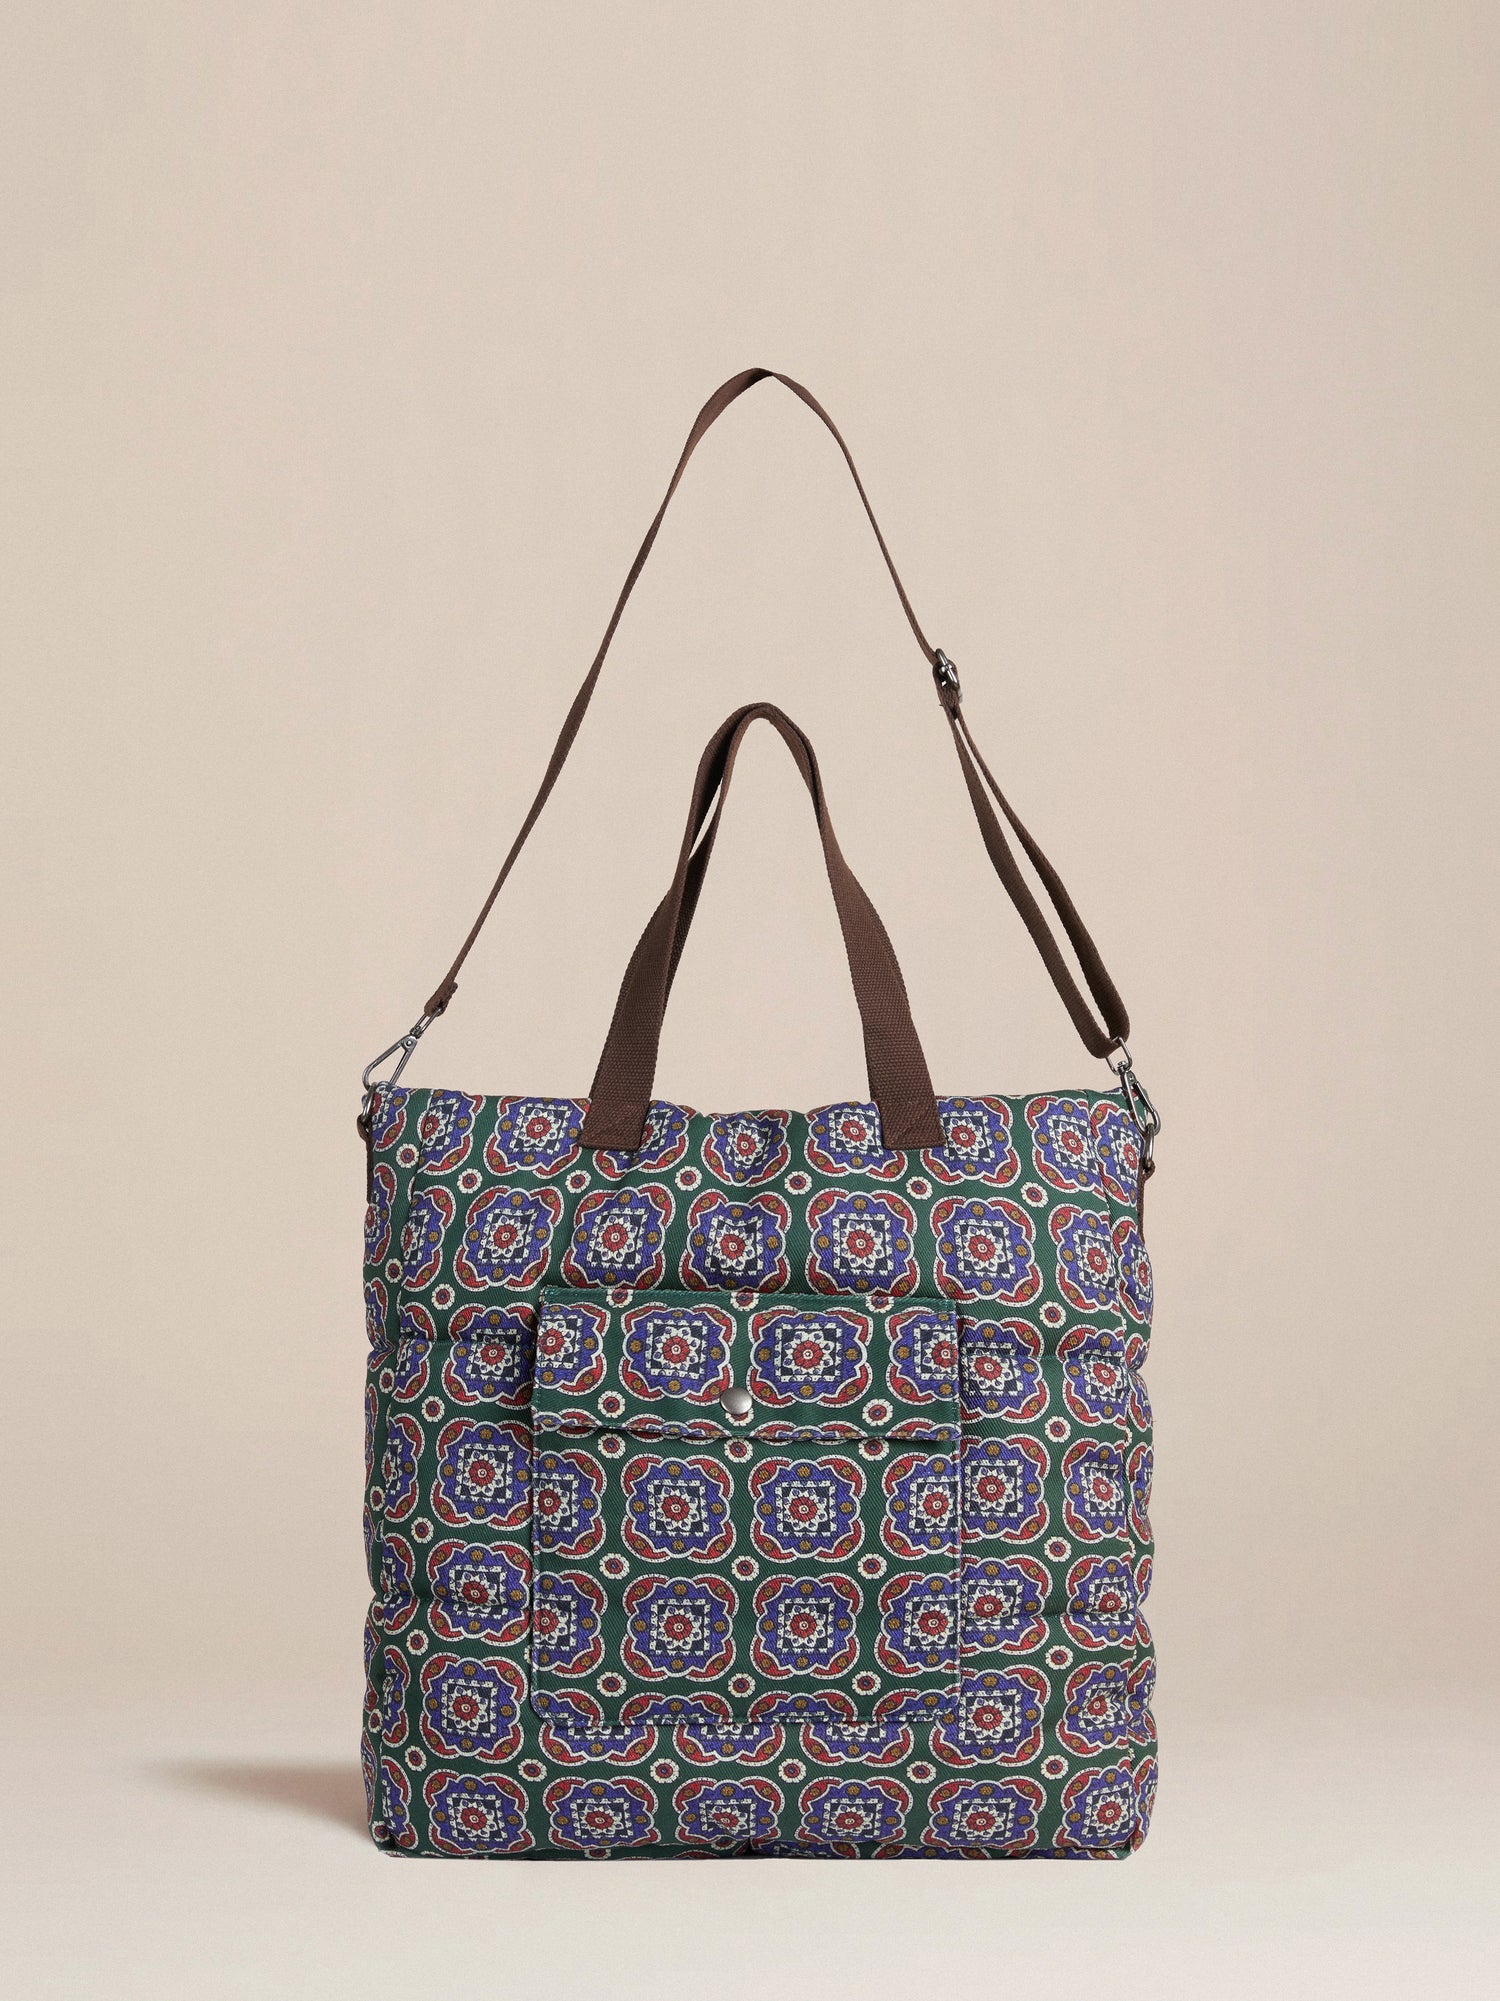 A colorful Pine Mosaic Bag featuring South Asian prints with a geometric pattern by Profound.